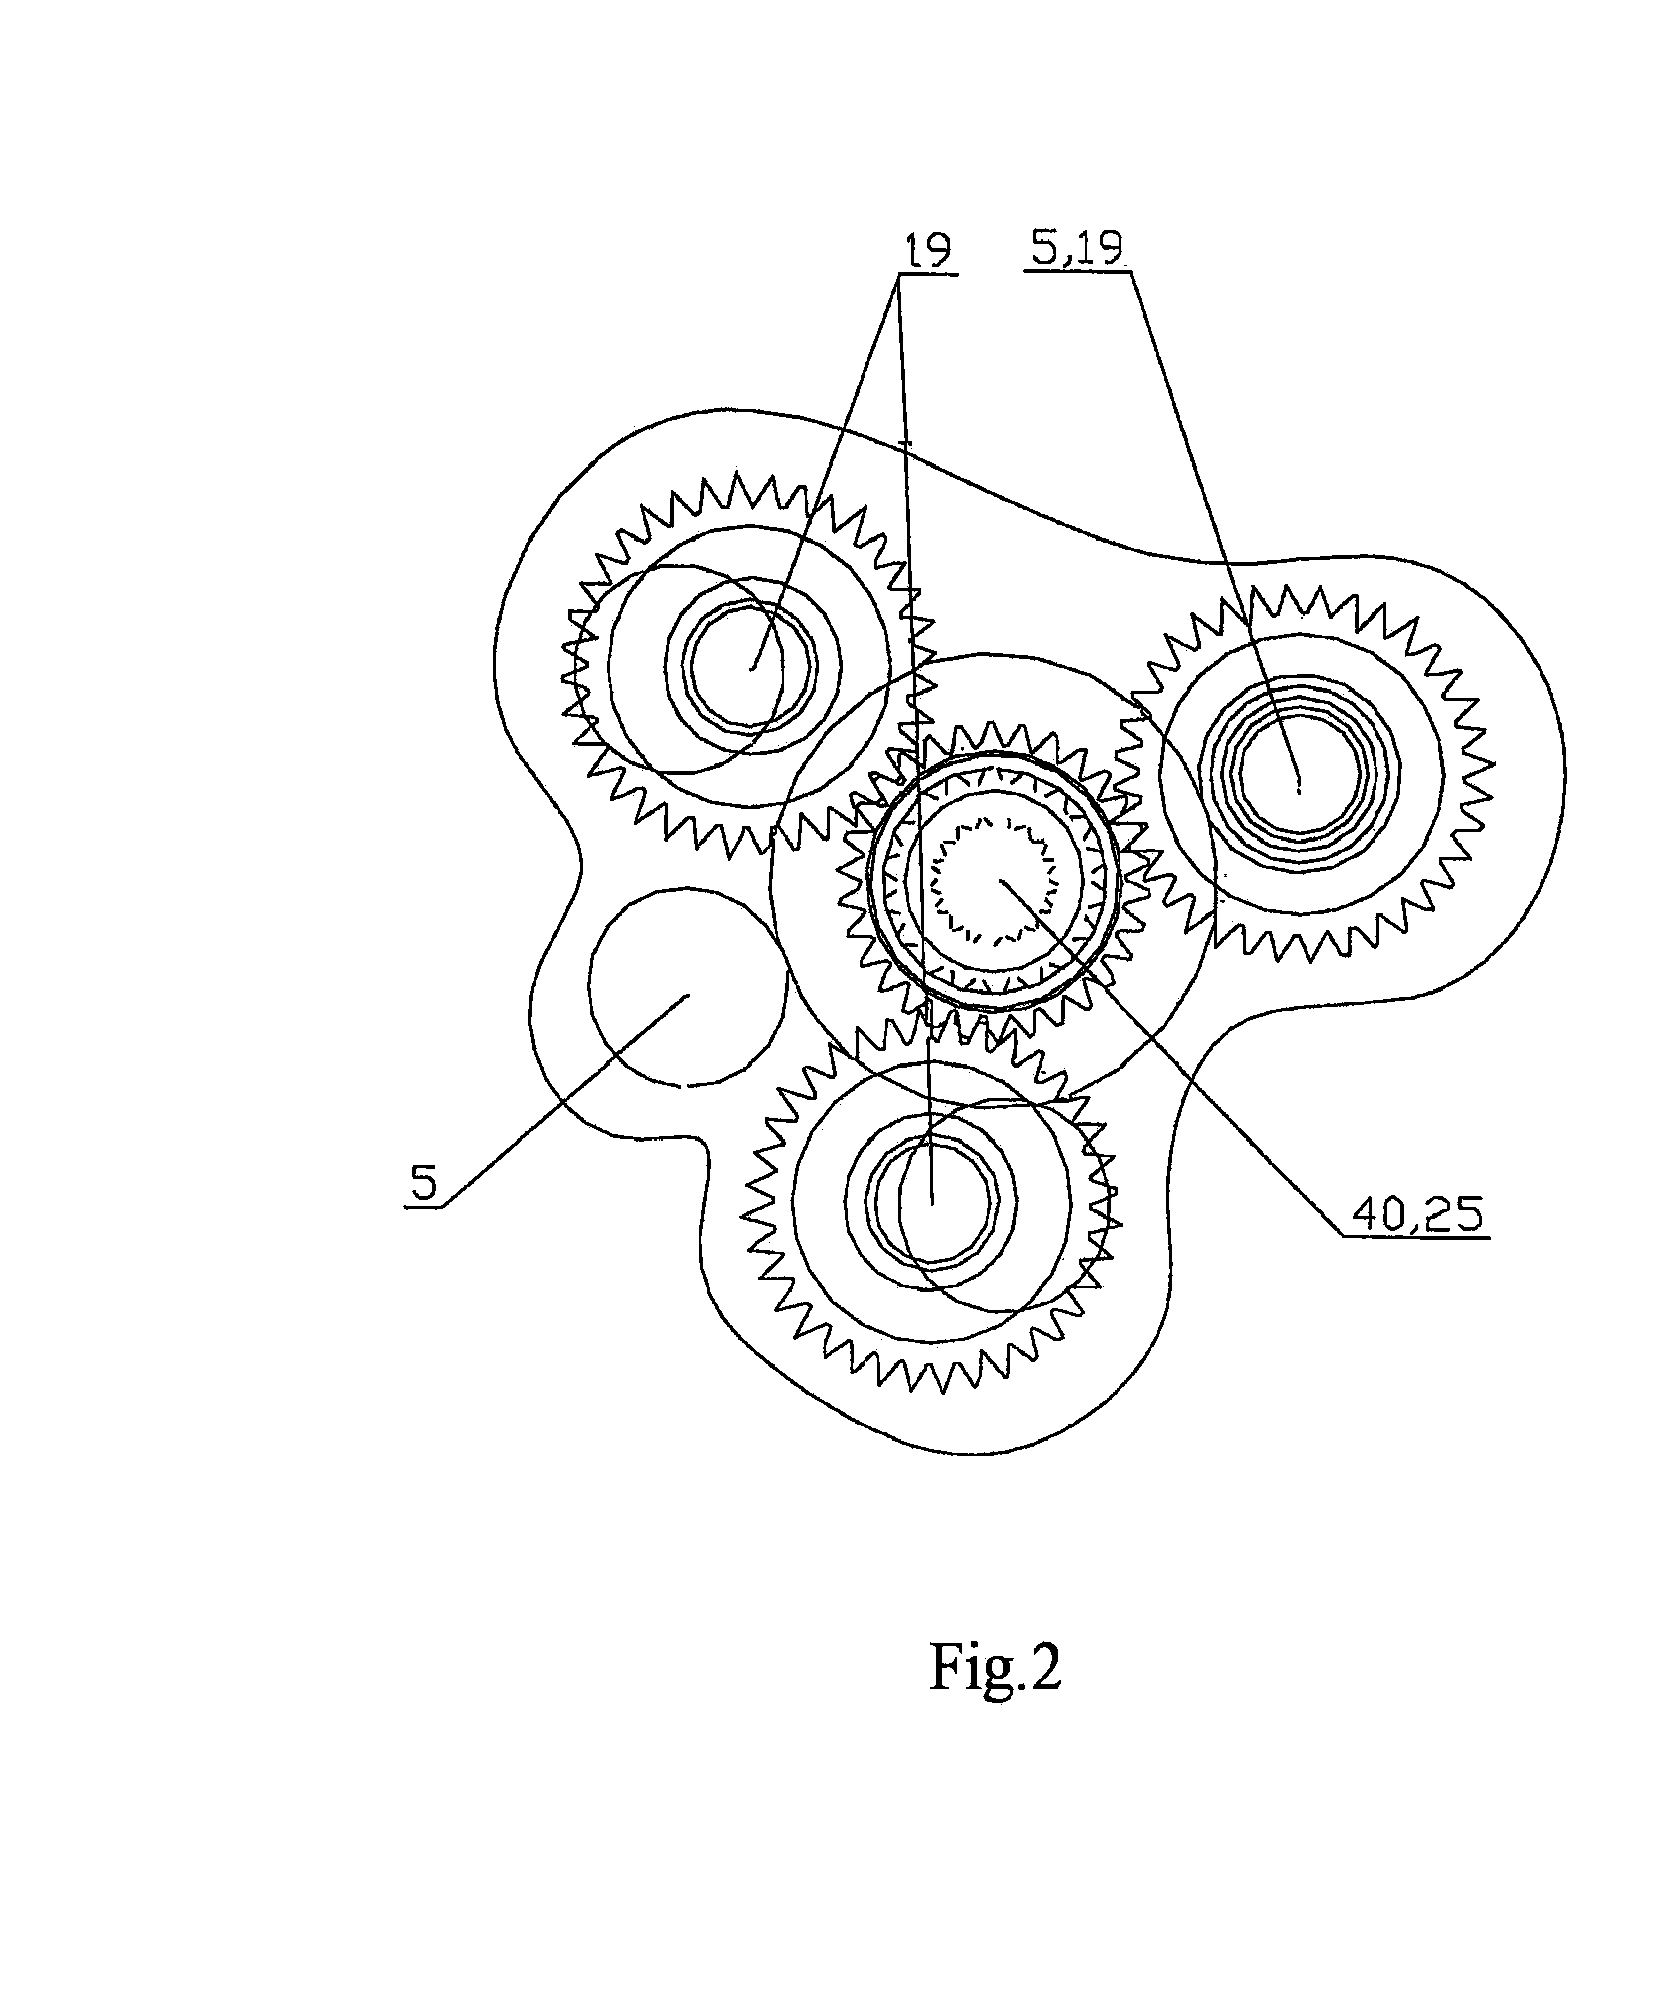 Multi-Speed Compound Vehicular Transmission Having an Auxiliary Section with Three Countershafts